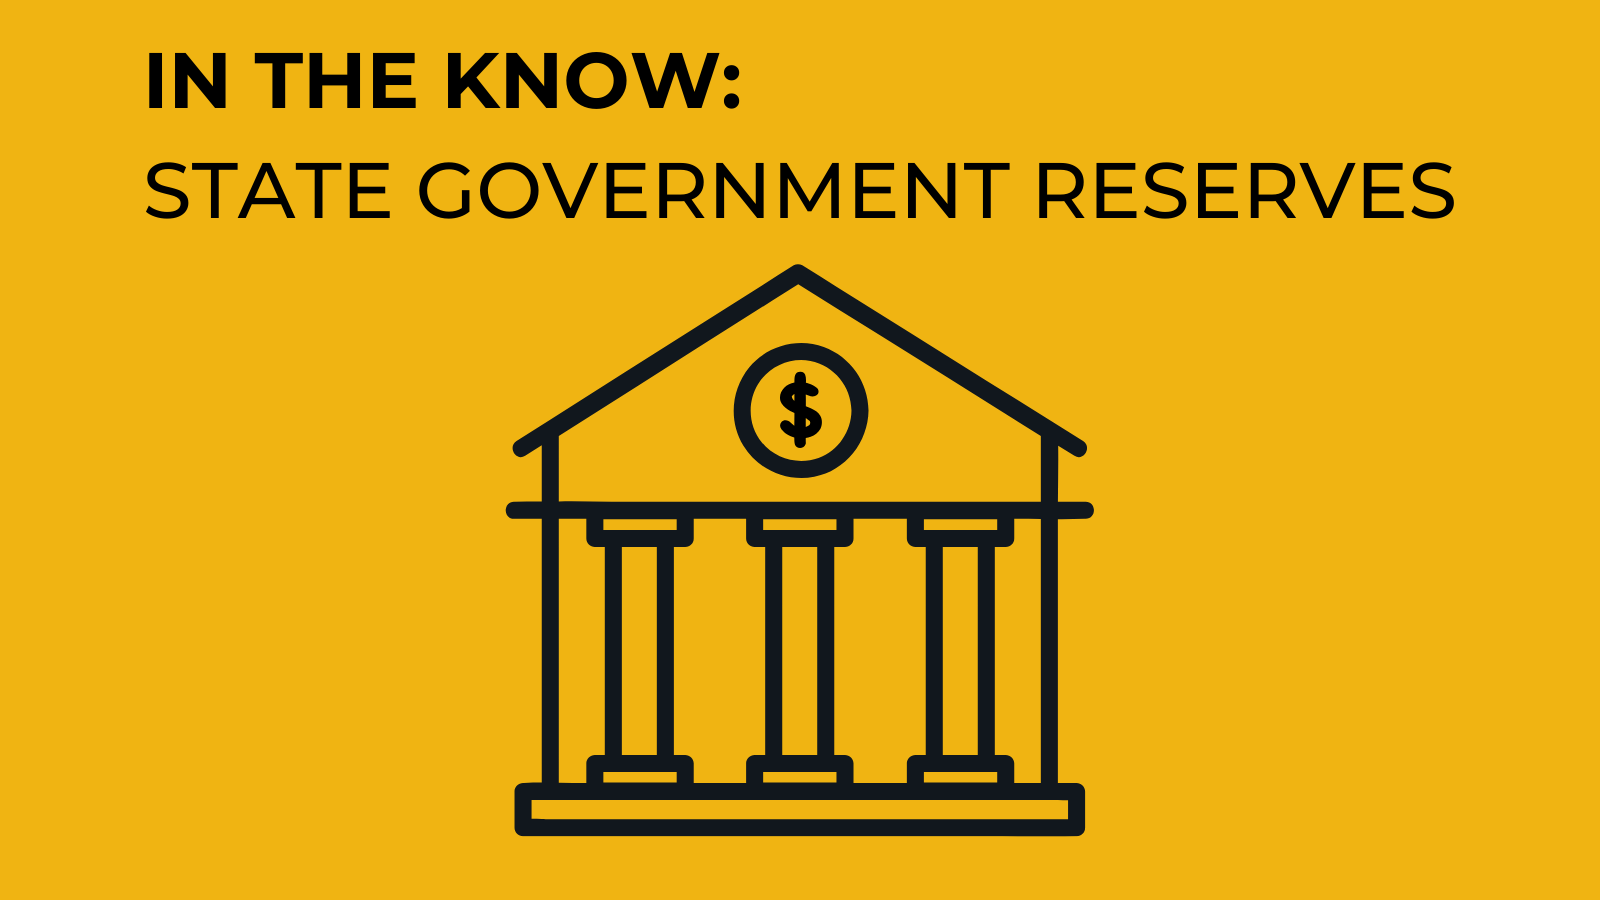 Informative overview of state government financial reserves.